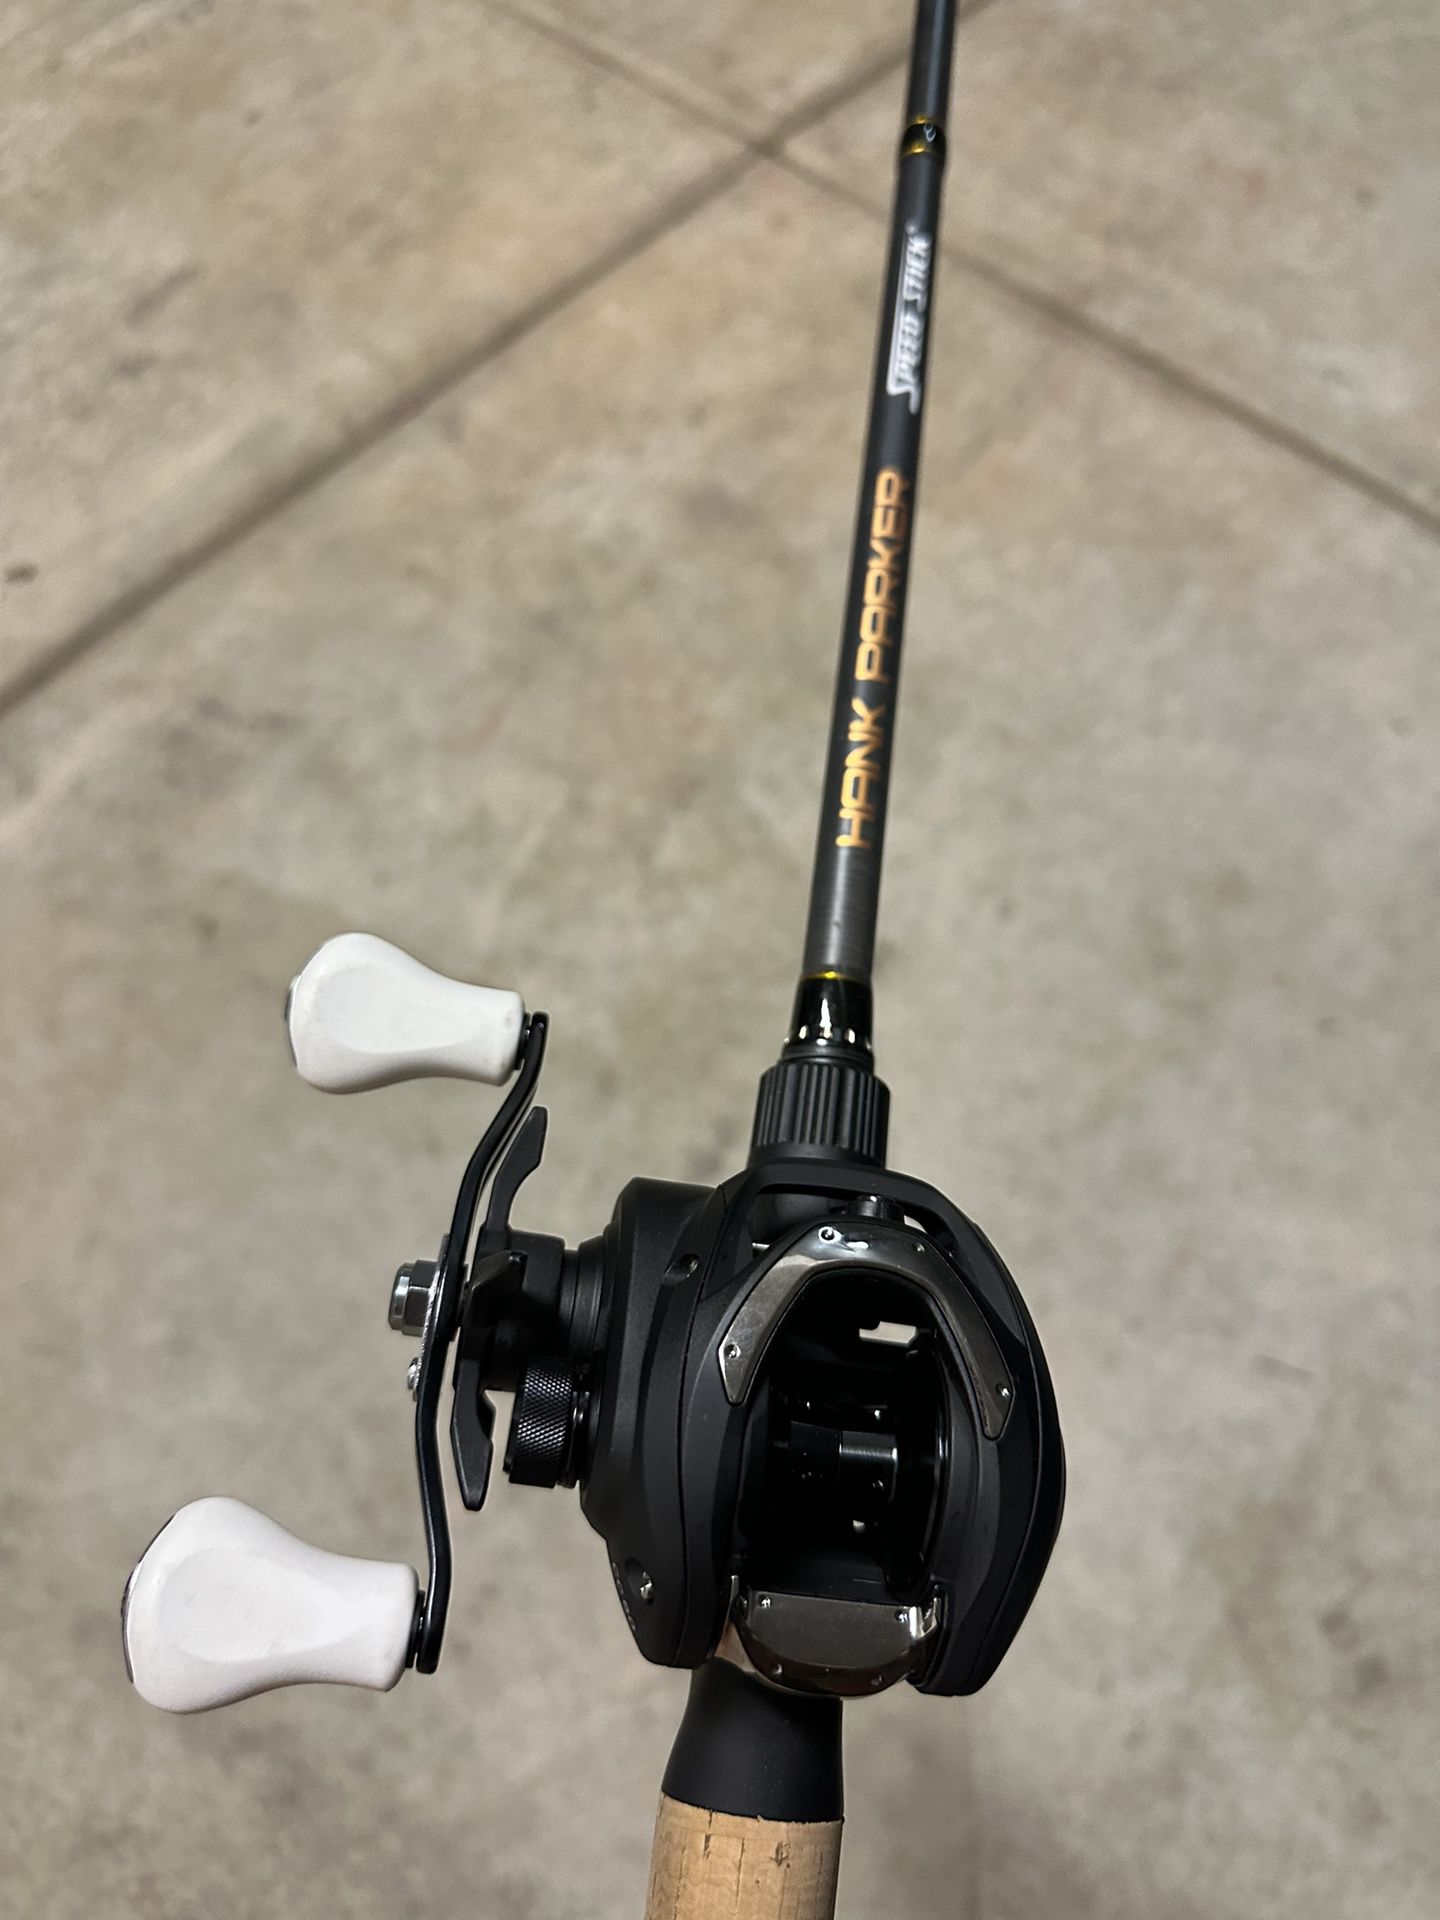 Baitcaster Combo for Sale in Ontario, CA - OfferUp